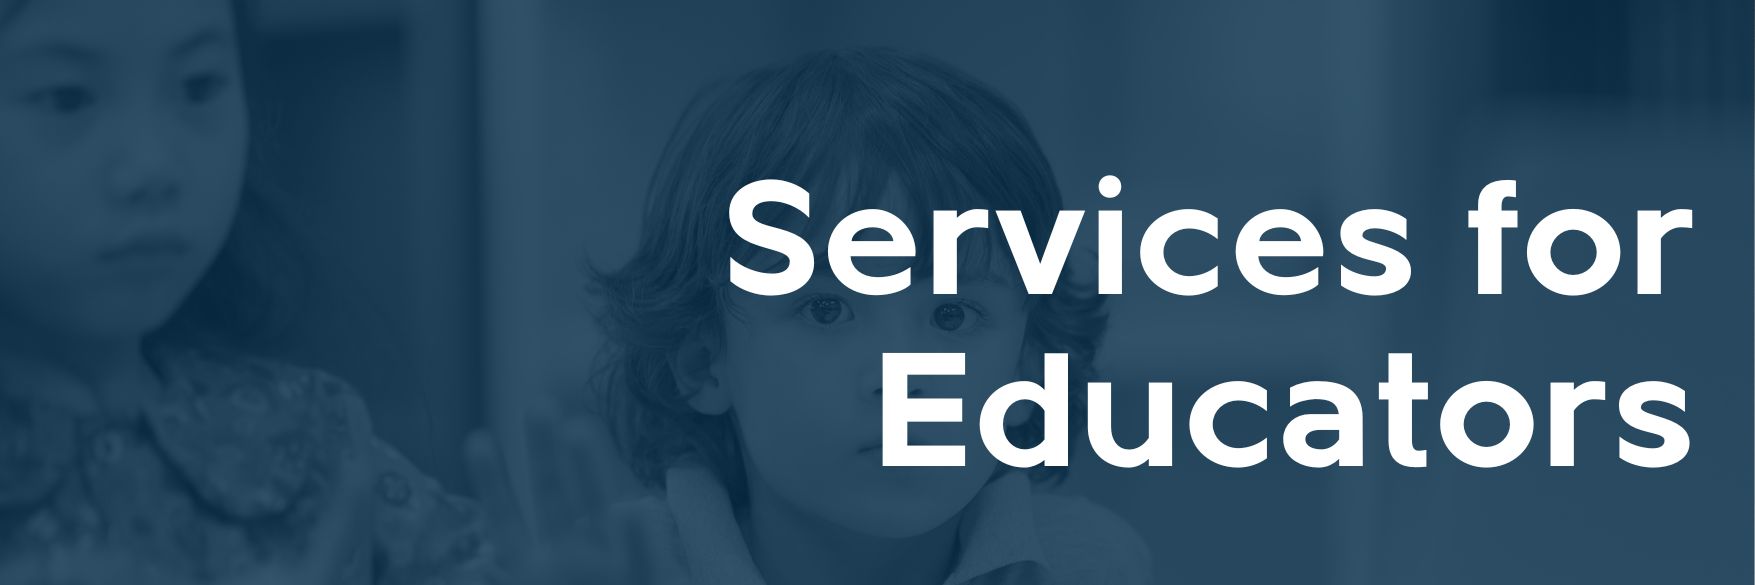 Header for Services for Educators